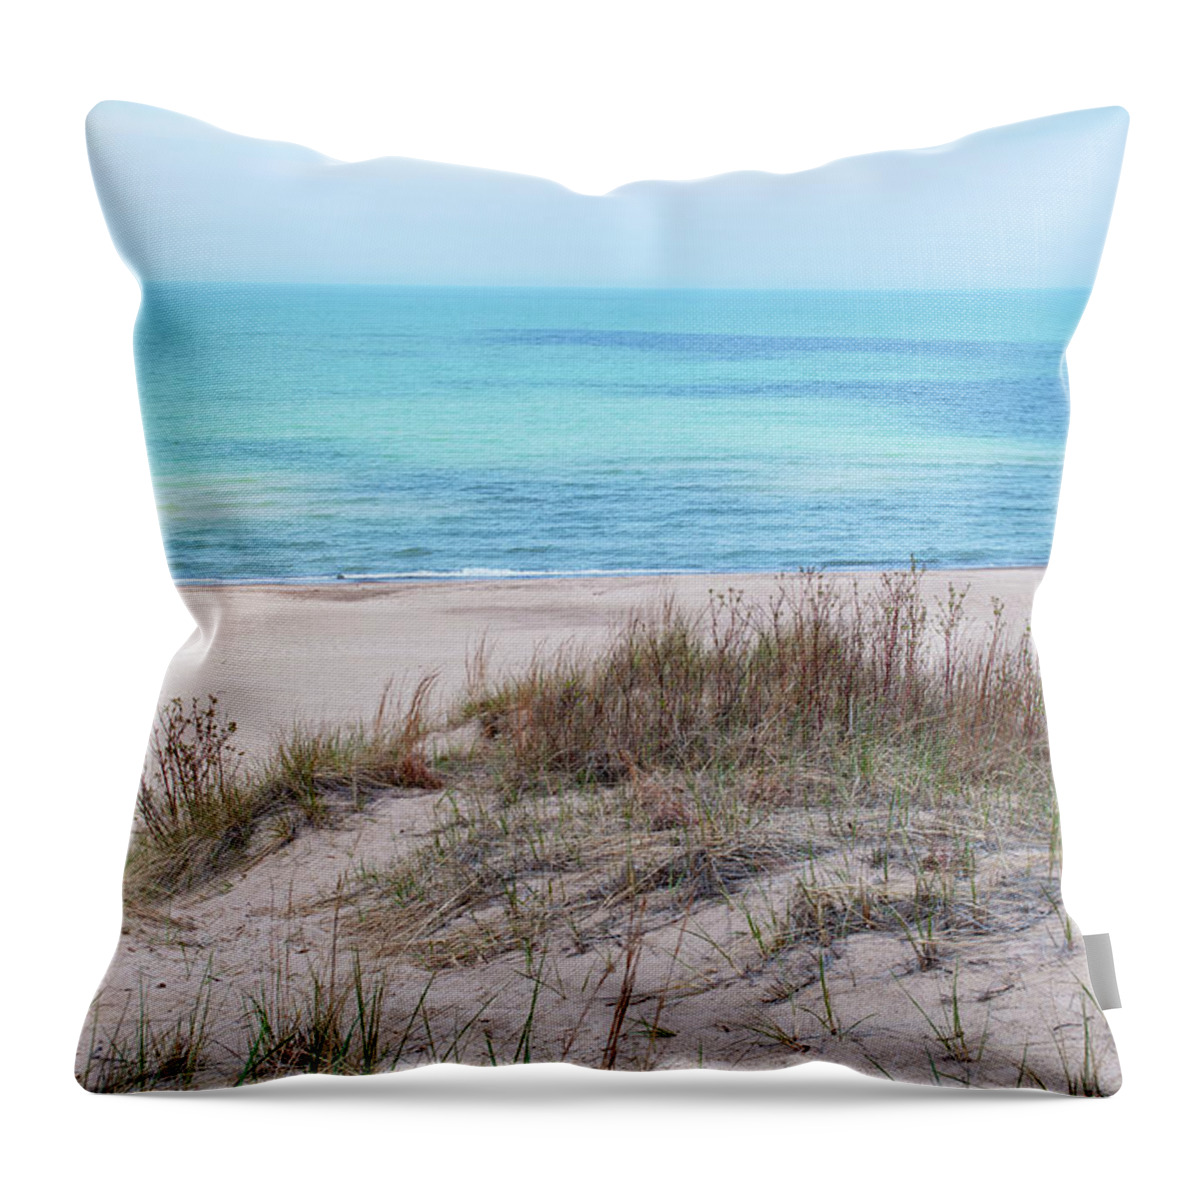 Indiana Dunes National Lakeshore Throw Pillow featuring the photograph Indiana Dunes National Lakeshore Evening by Kyle Hanson